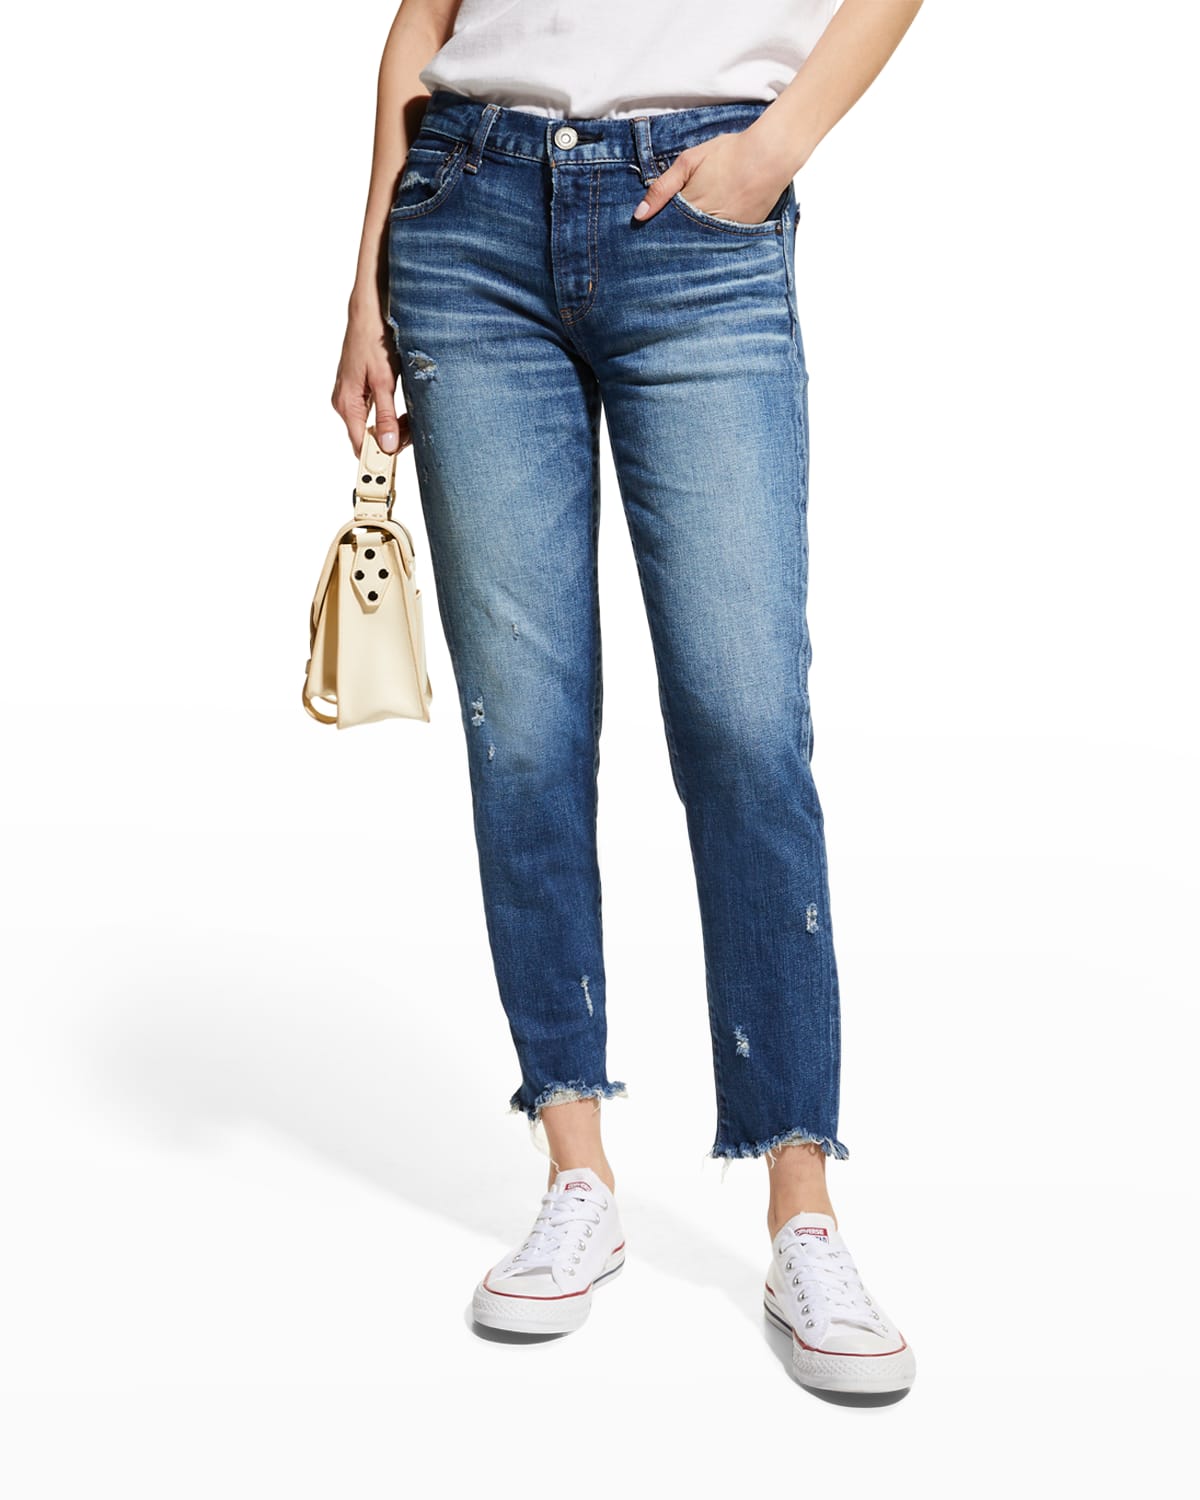 Daleville Mid-Rise Distressed Cropped Skinny Jeans